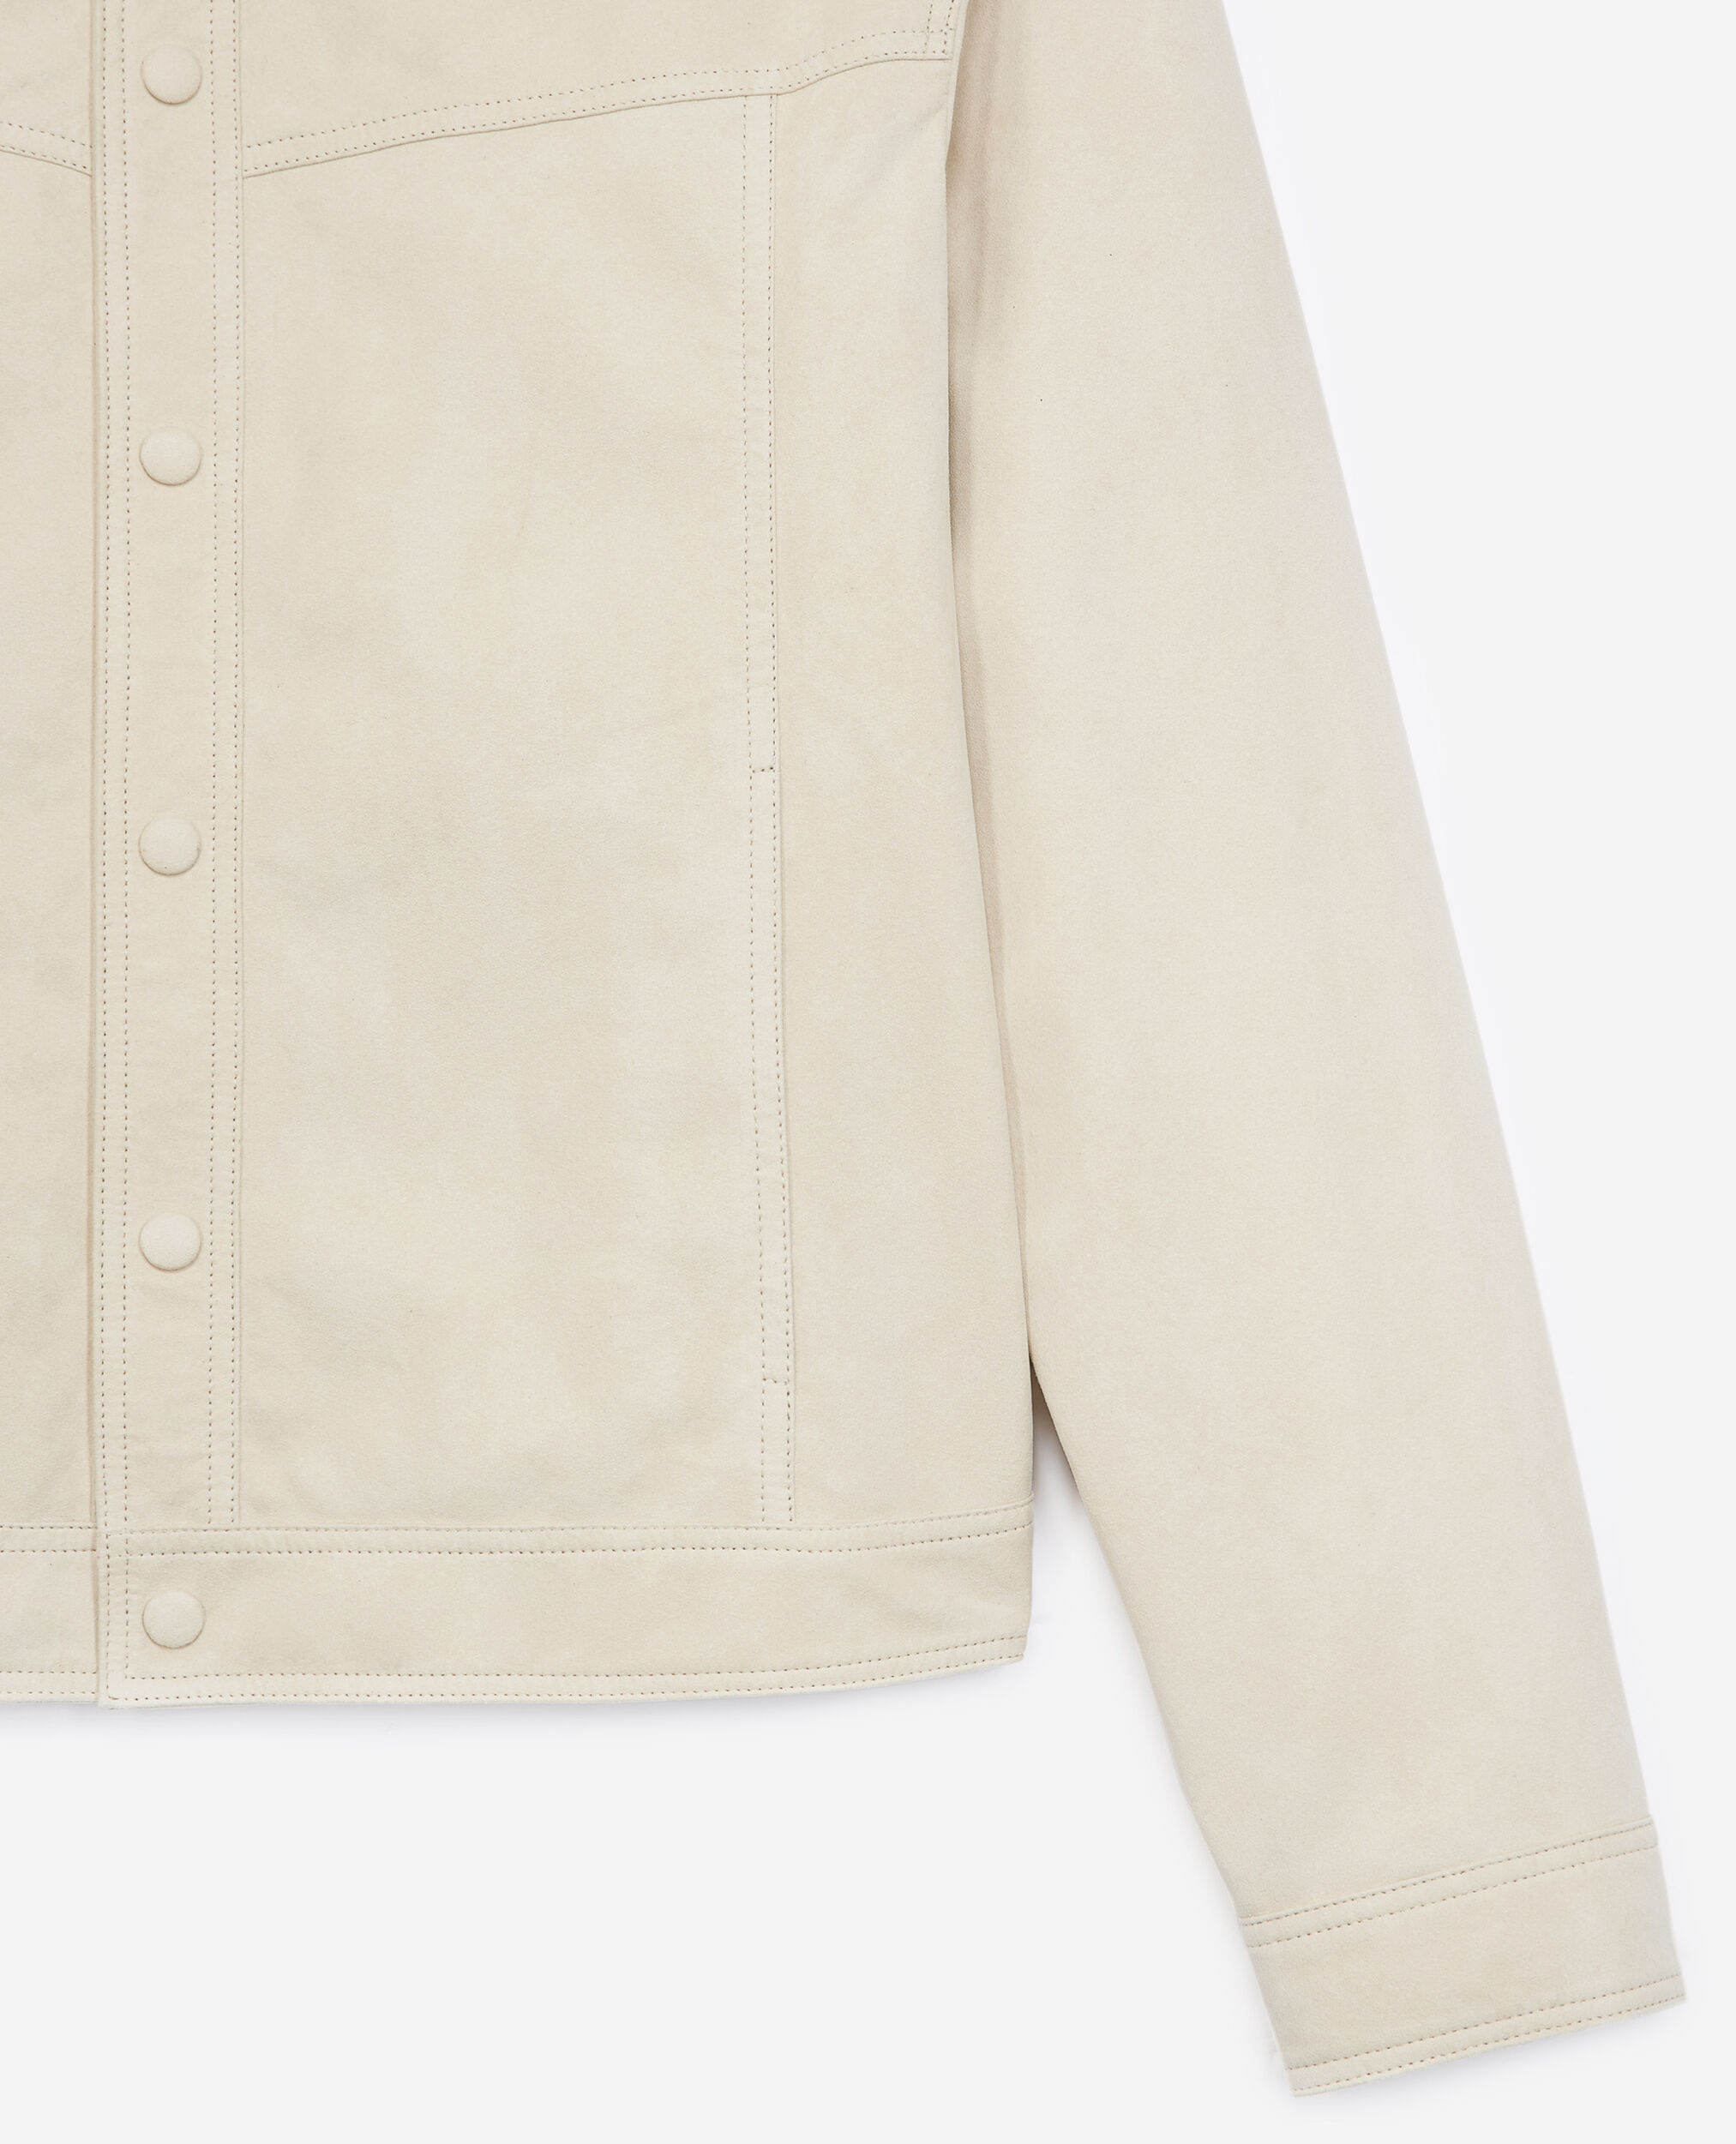 Suede-like beige leather shirt w/buttons, LIGHT BEIGE, hi-res image number null